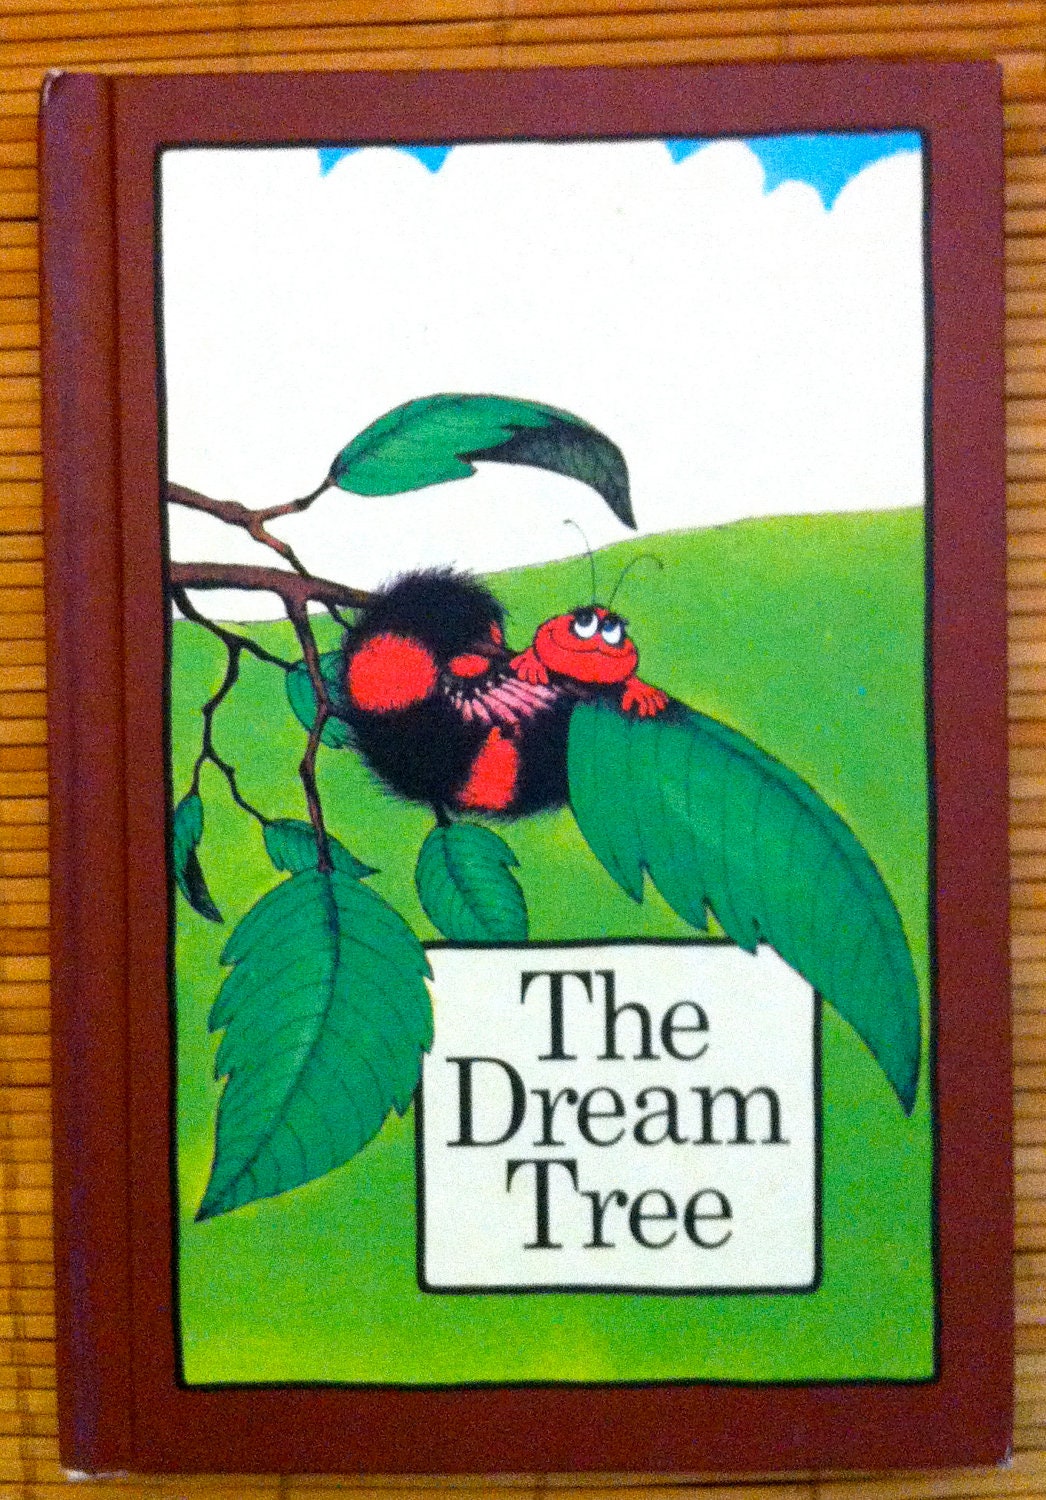 The Dream Tree - A Serendipity Book - by Stephen Cosgrove & Robin James - published in 1974 - KingsleyVintage